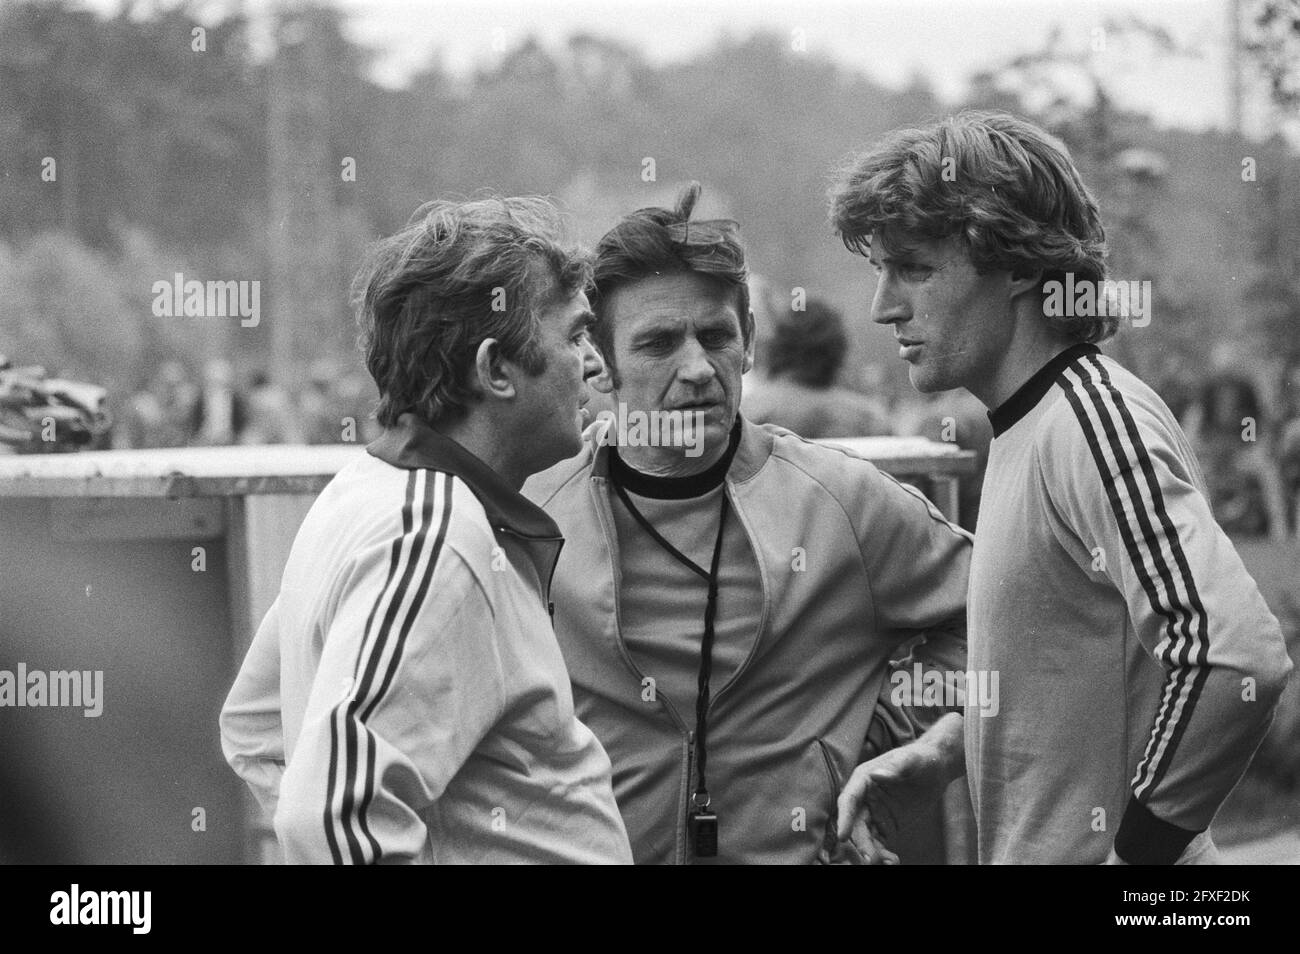 Training Dutch national team; trainers Happel (l) and Zwartkruis (middle) talking to captain Krol, May 22, 1978, sports, training, soccer, The Netherlands, 20th century press agency photo, news to remember, documentary, historic photography 1945-1990, visual stories, human history of the Twentieth Century, capturing moments in time Stock Photo